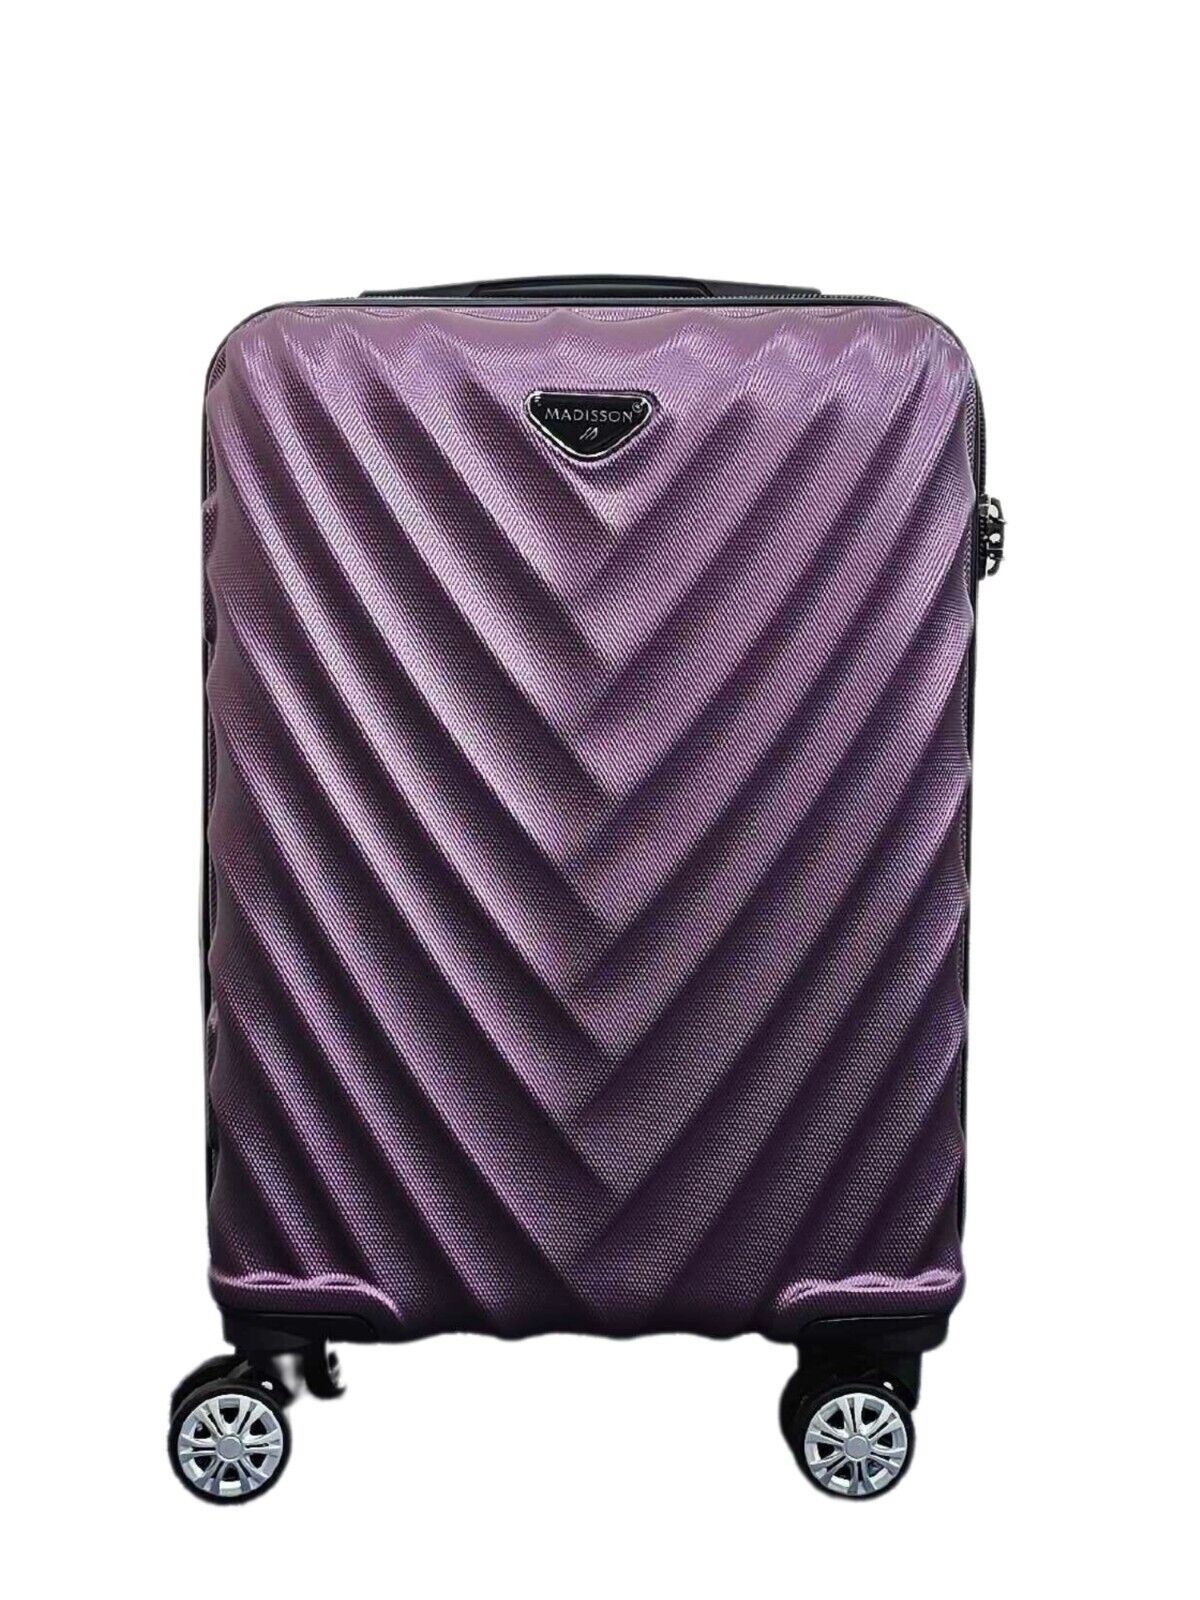 Strong Hard shell Suitcase 4 Wheel ABS Lightweight Cabin Luggage